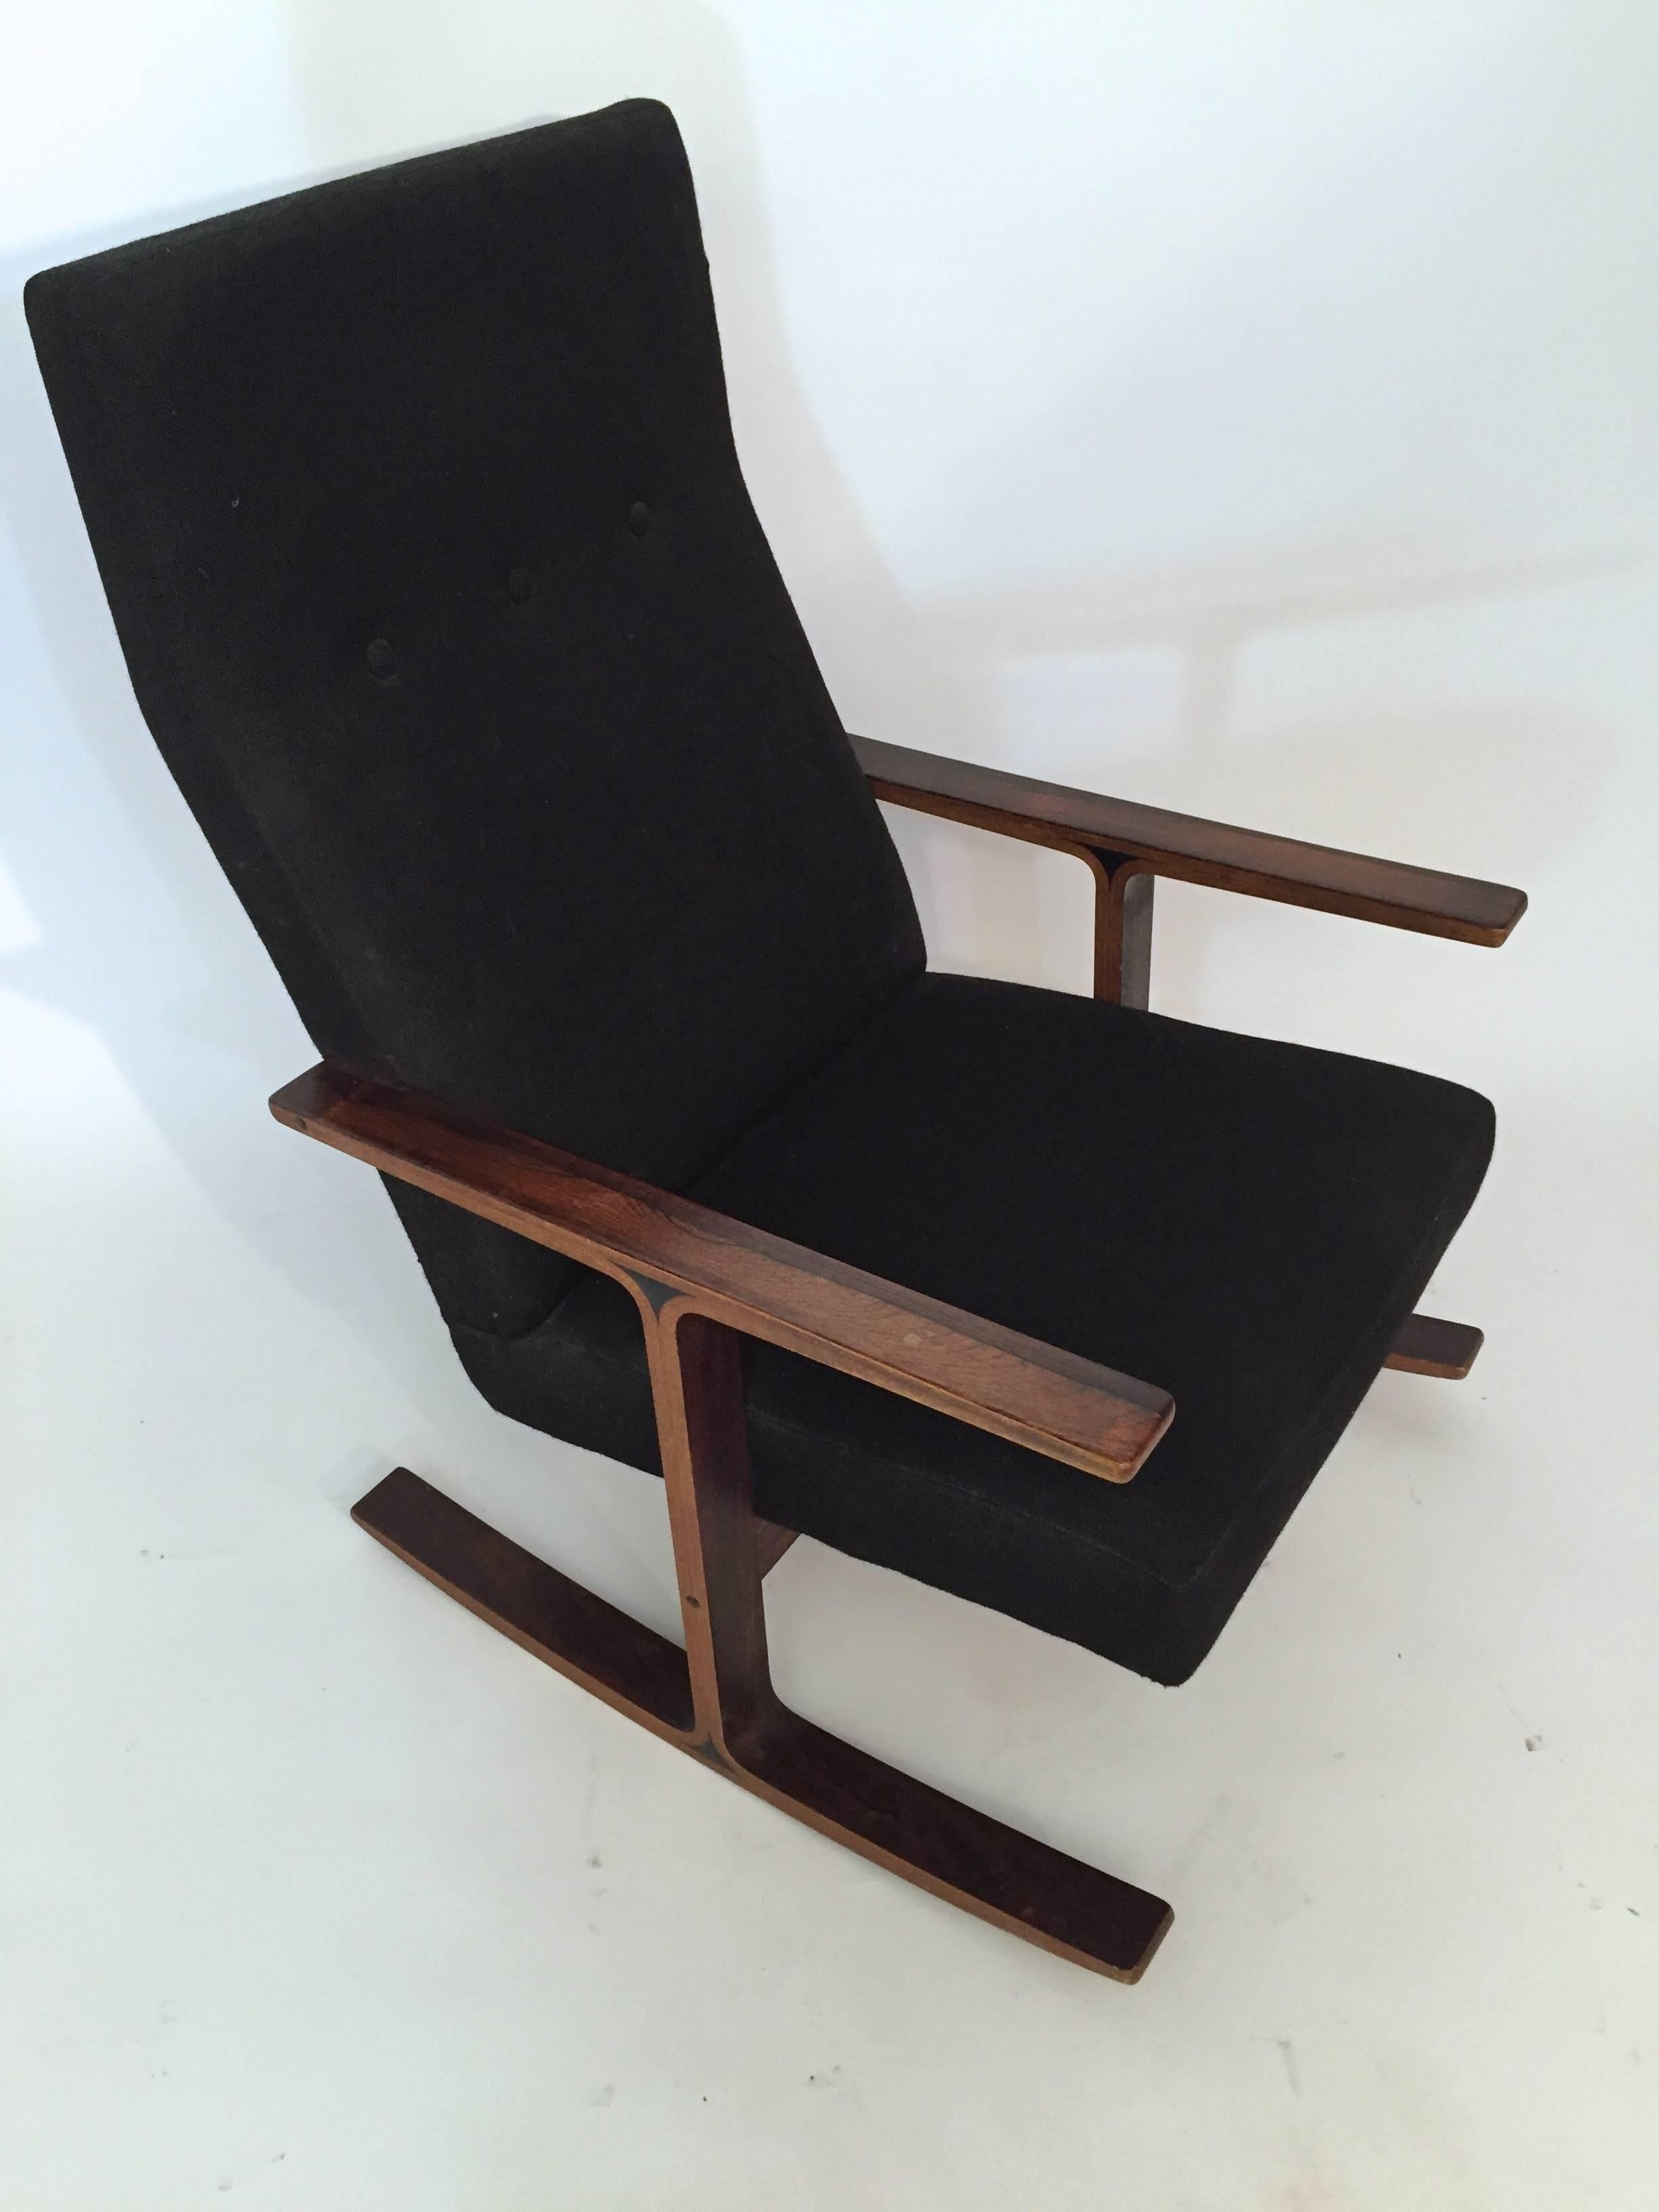 Fine bent Rosewood laminate and original black wool hopsack upholstery and ebonized triangular accents. Unsigned. Styled in the manner of the Heron rocking chair by Mitsumasa Sugasawa for Tendo Mokko.